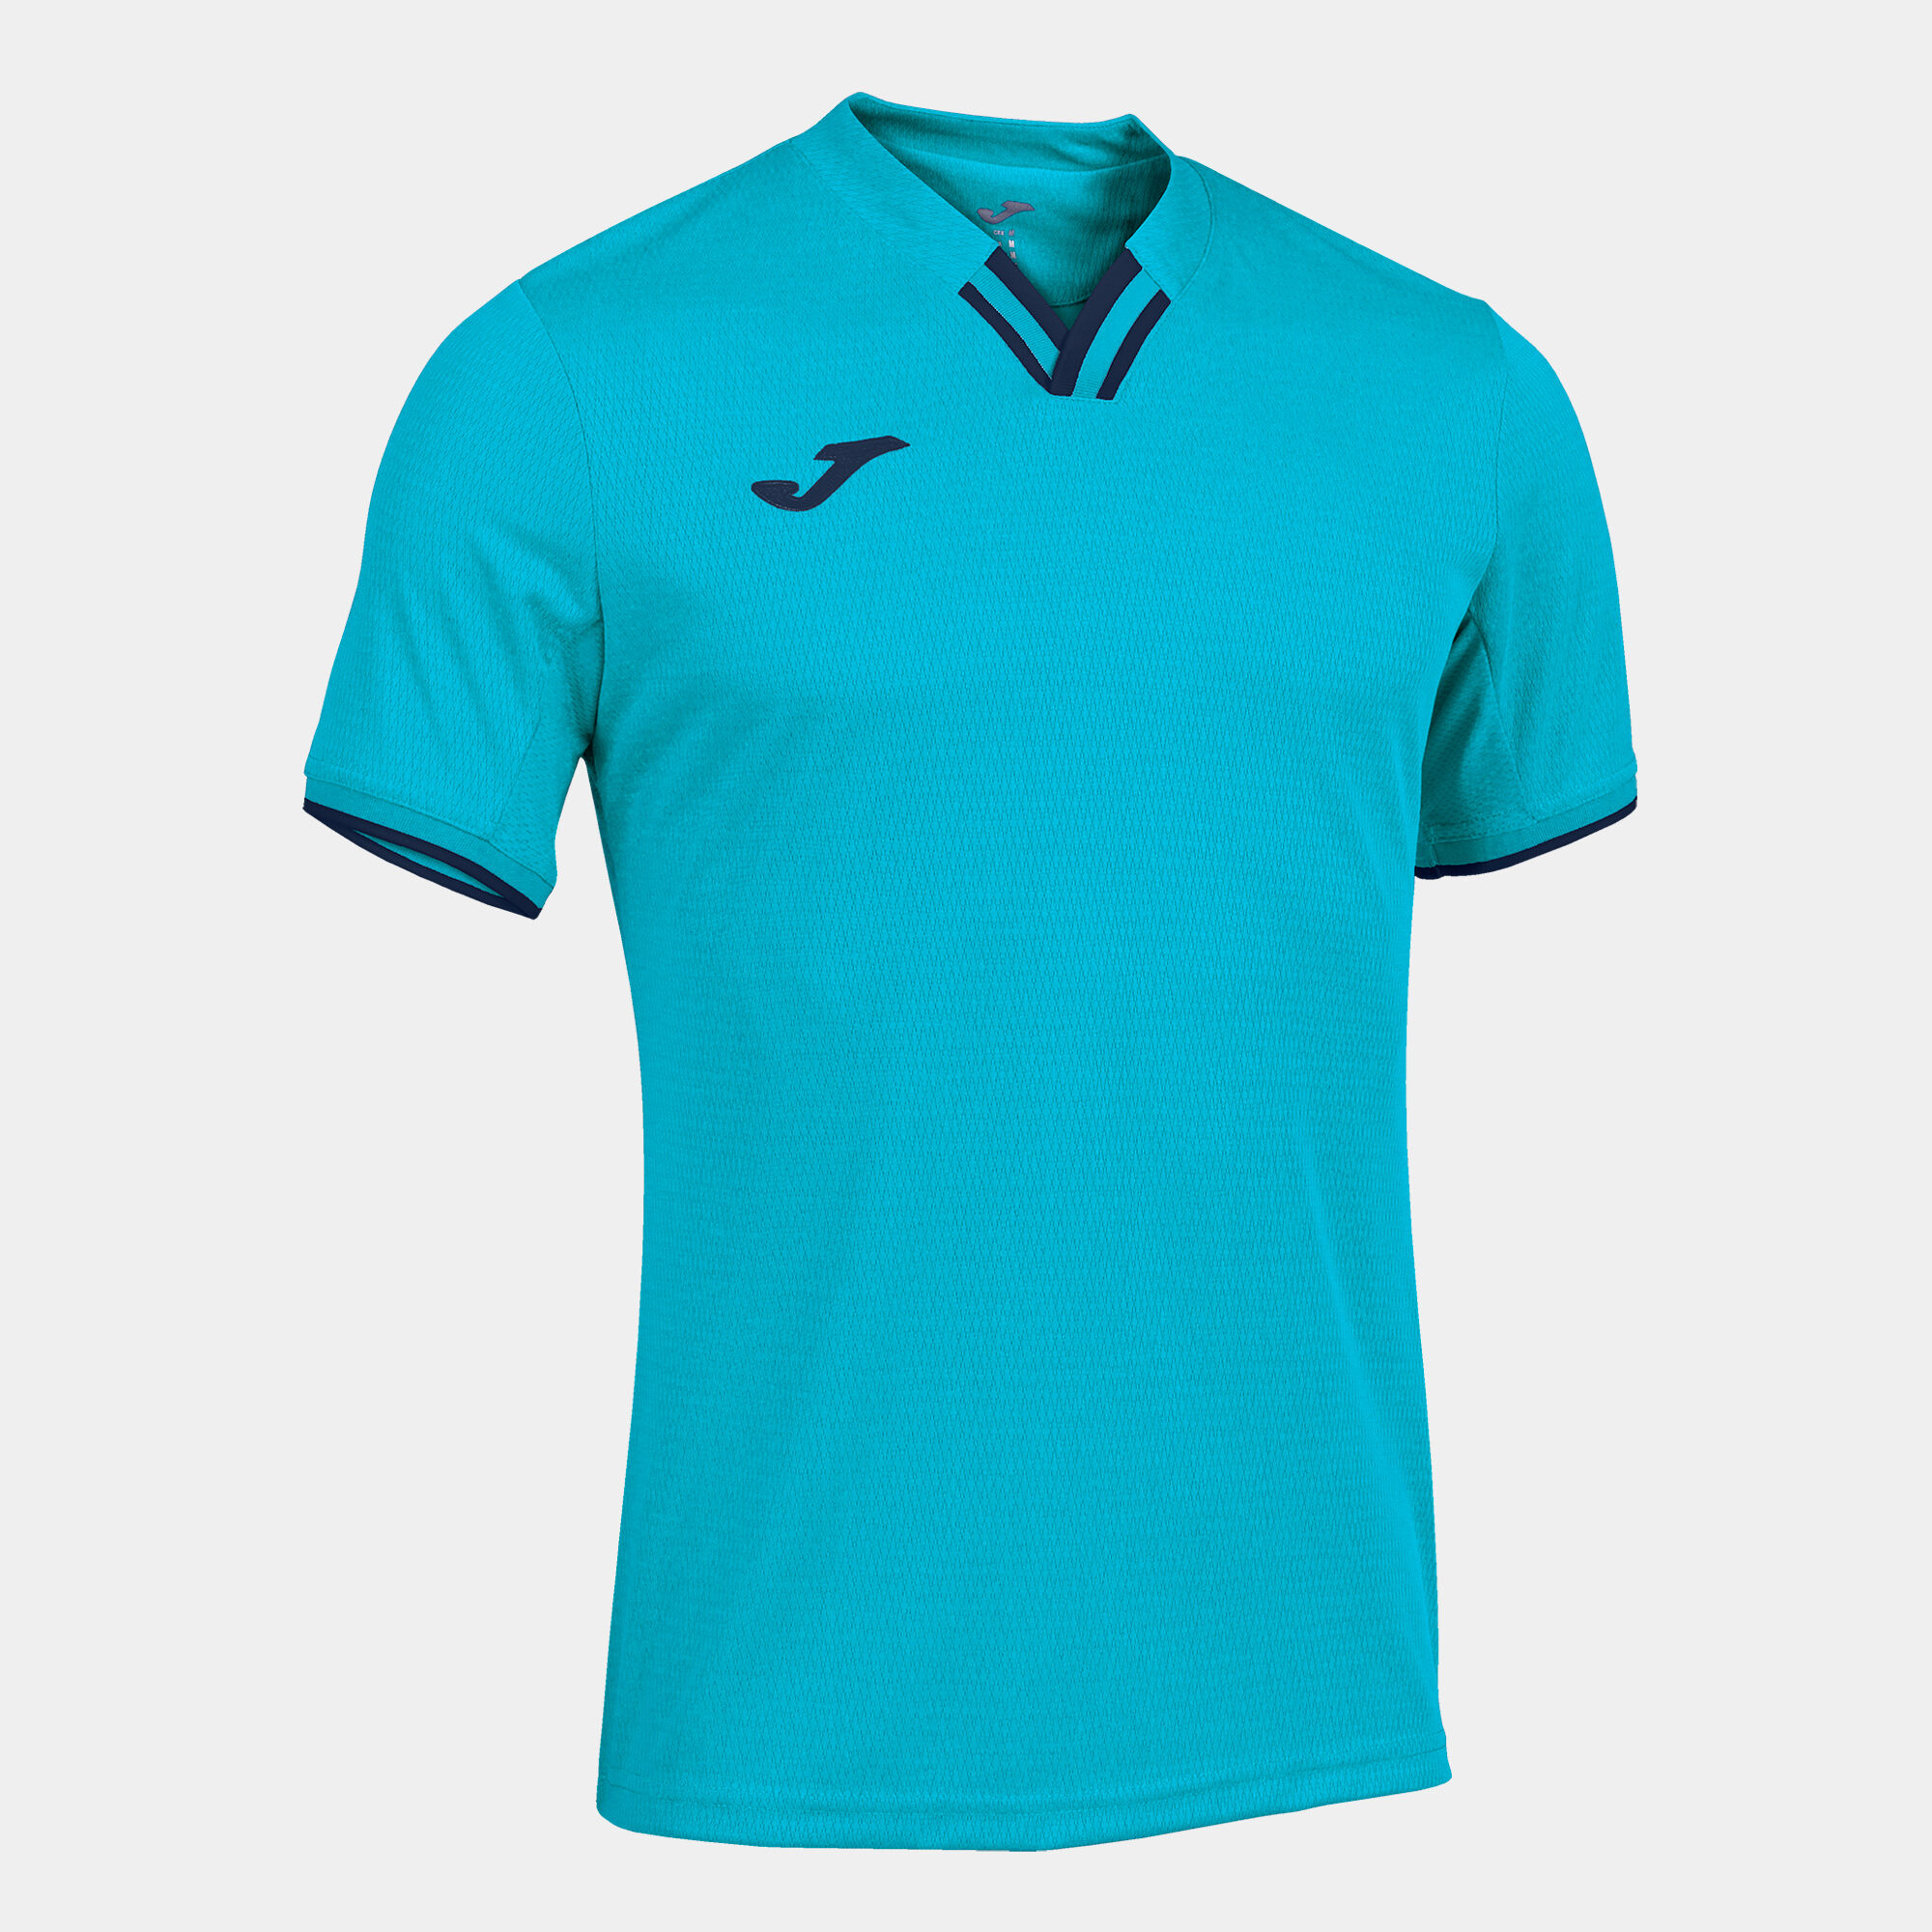 MAILLOT MANCHES COURTES HOMME TOLETUM IV TURQUOISE FLUO BLEU MARINE